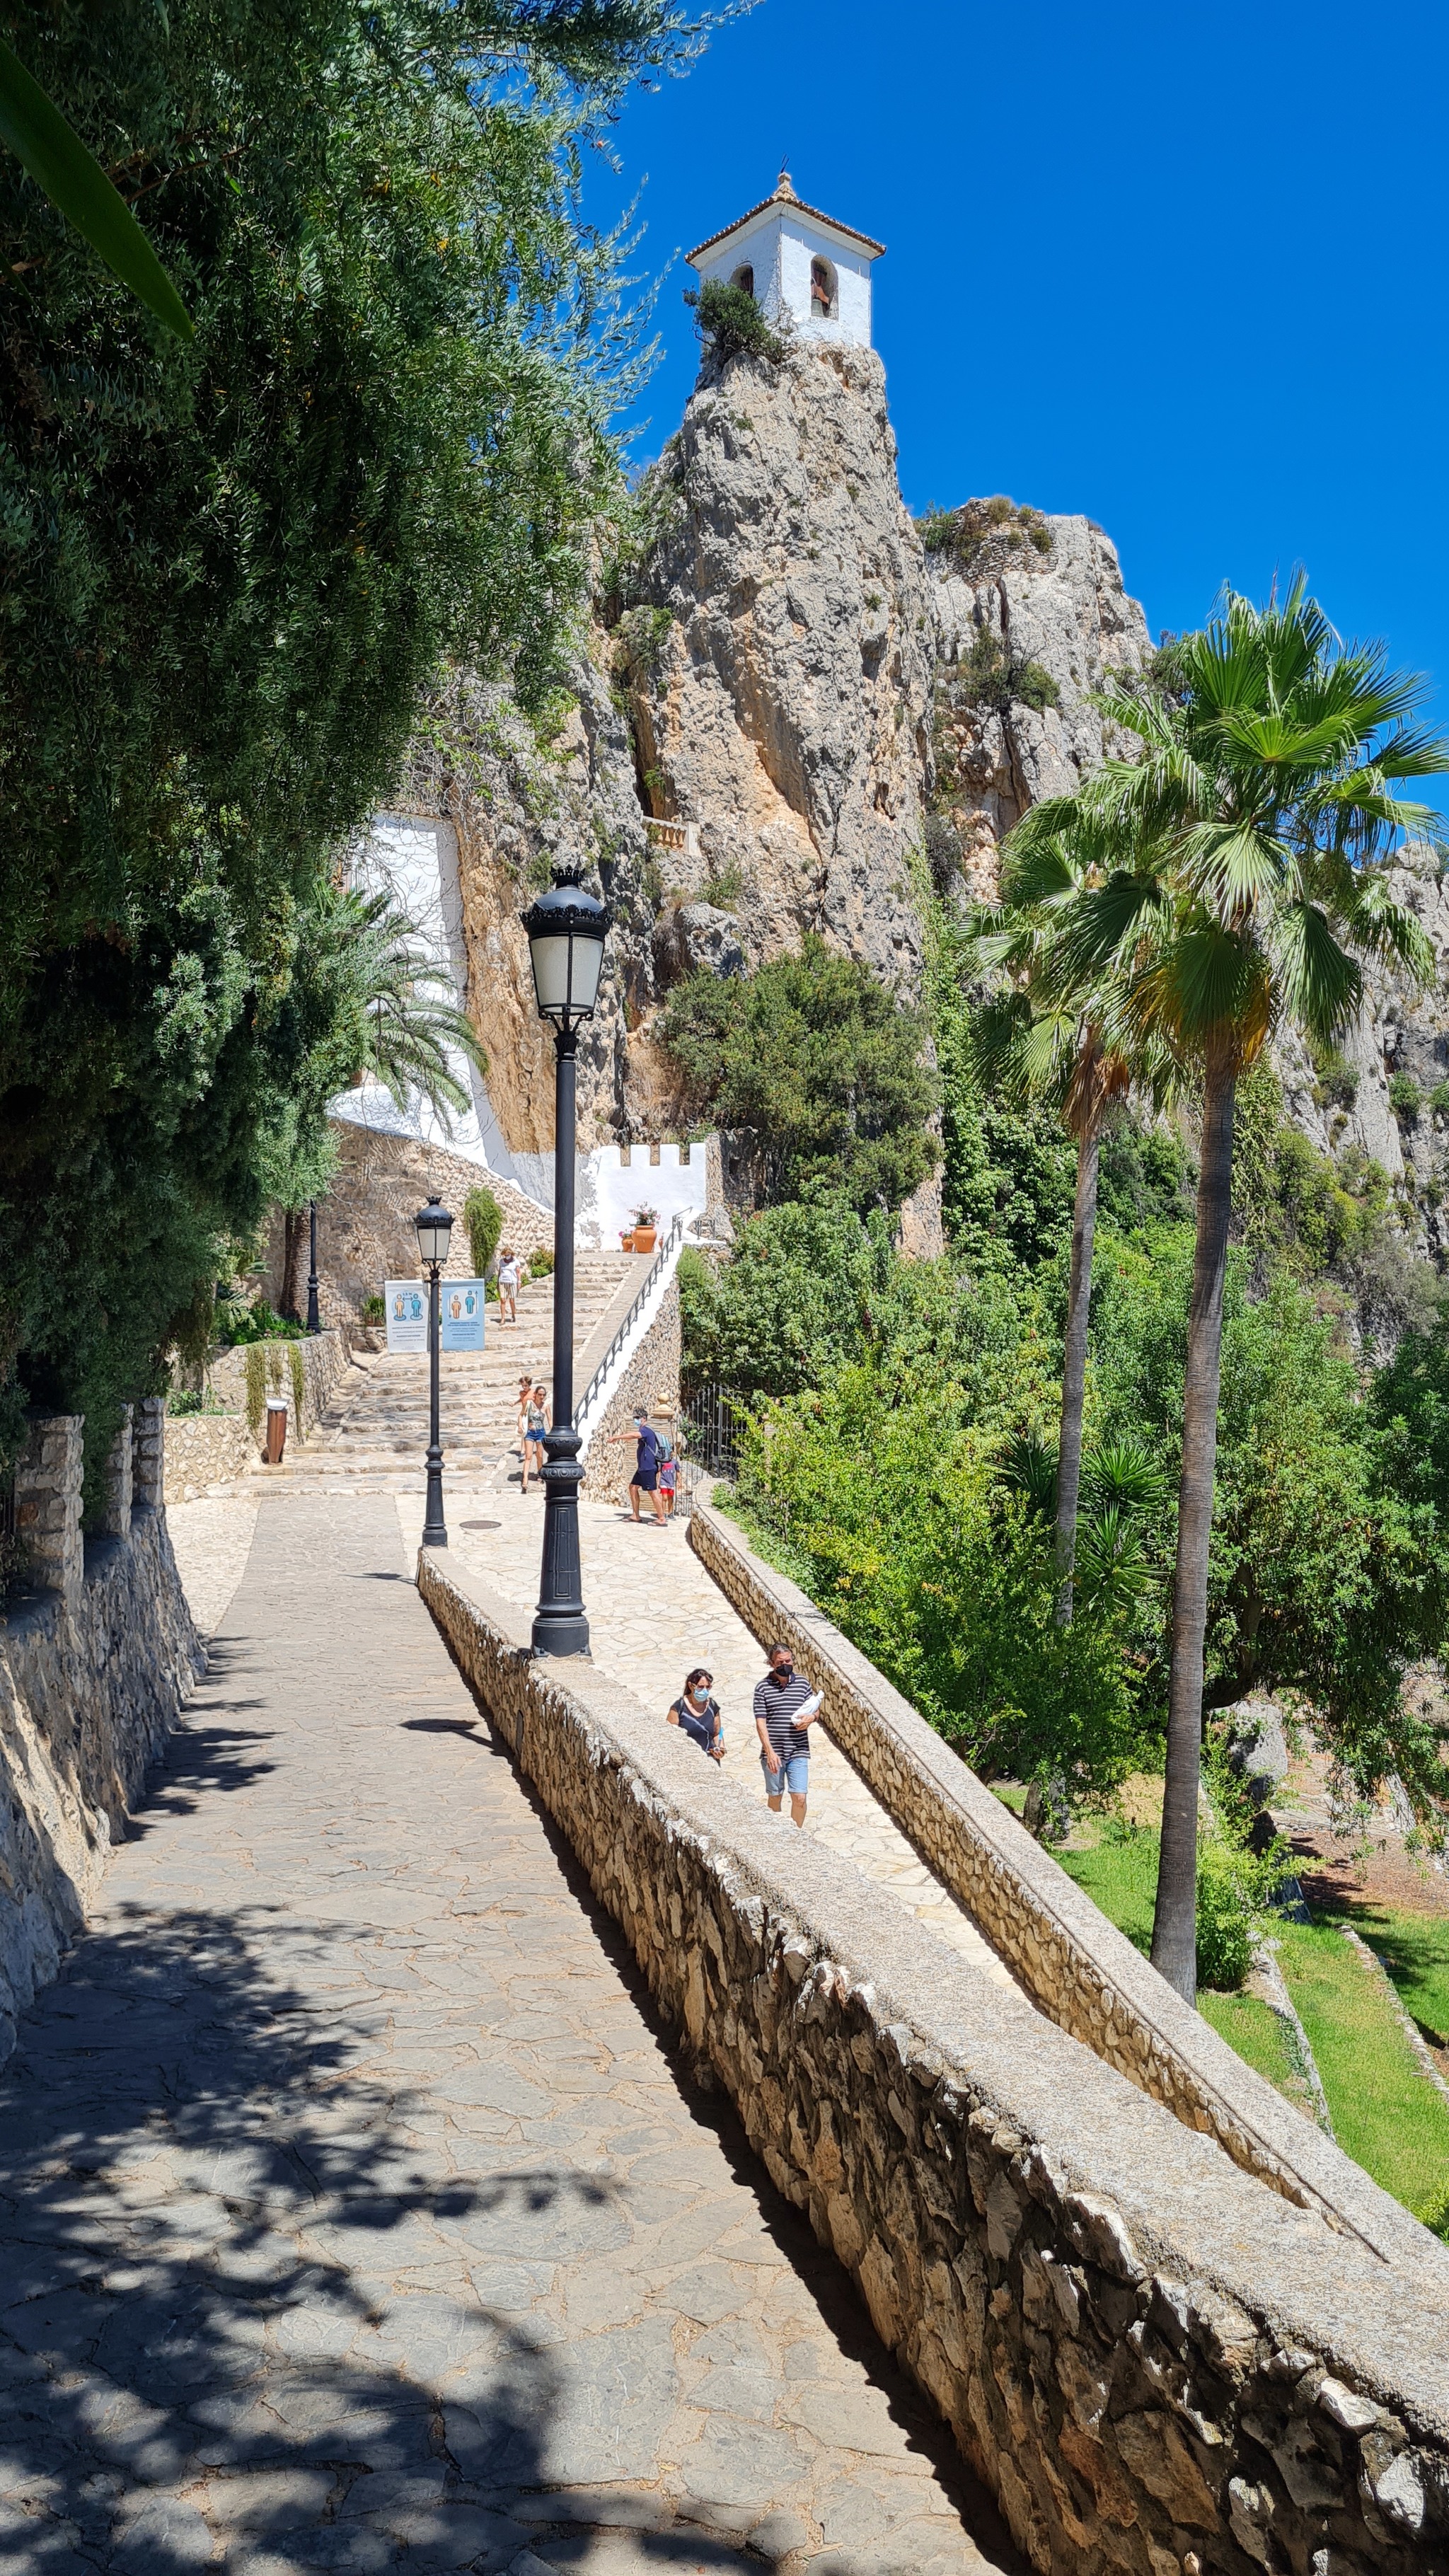 Guadalest, Alicante, Spain - My, Spain, Tourism, Relaxation, Camping, Lake, Europe, Emigration, Our abroad, , Alicante, Video, Longpost, Vertical video